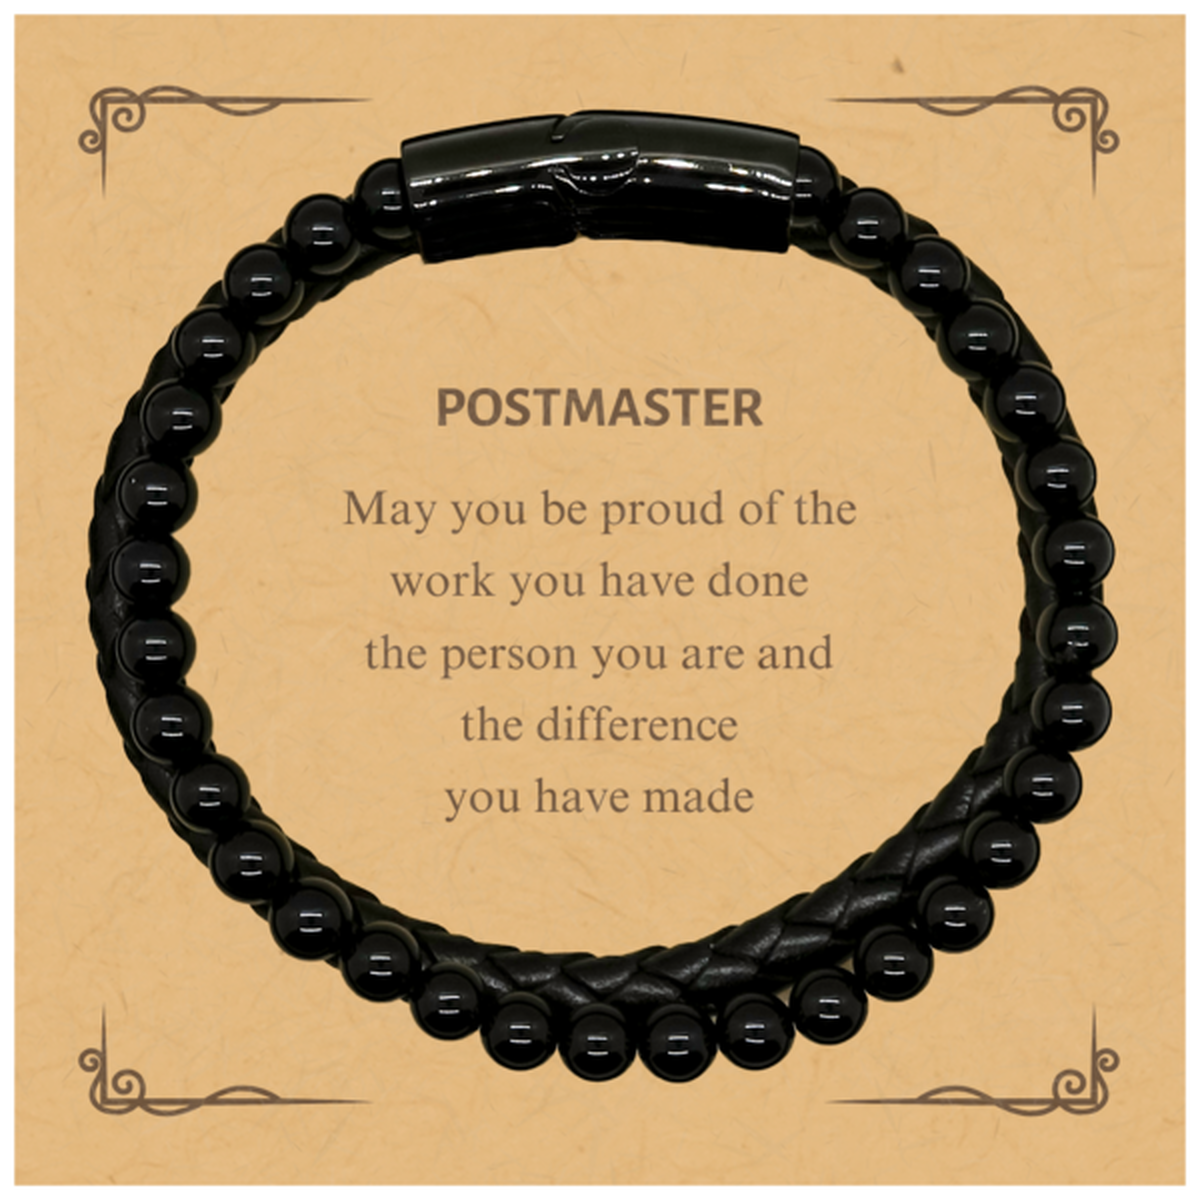 Postmaster May you be proud of the work you have done, Retirement Postmaster Stone Leather Bracelets for Colleague Appreciation Gifts Amazing for Postmaster